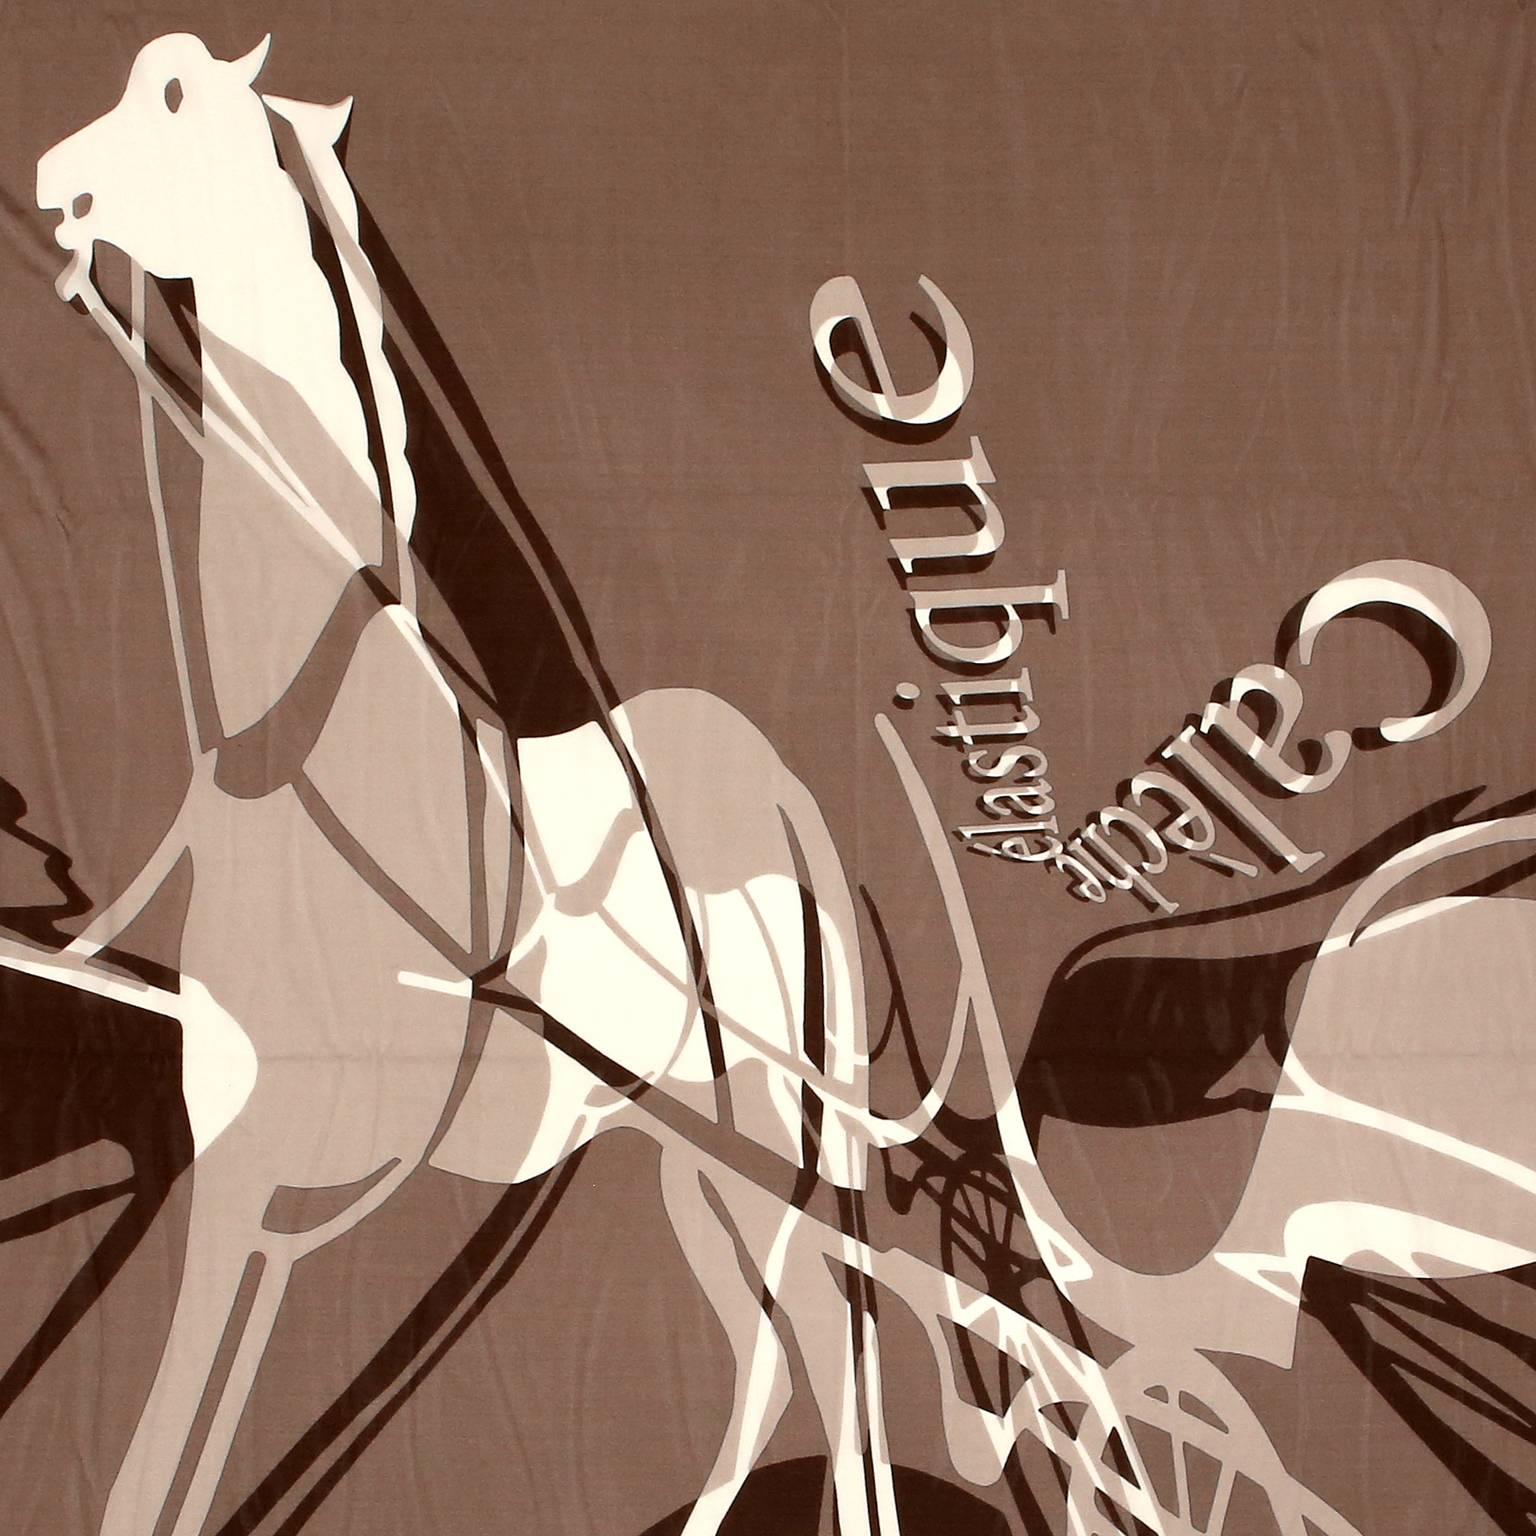 This authentic Hermès Caleche Elastique 90 cm Silk Scarf is pristine.  Designed by Bali Barret, this “elastic carriage” design features the iconic Hermès horse and groom in a neutral brown colorway.  Stretched and distorted in an abstract fashion,